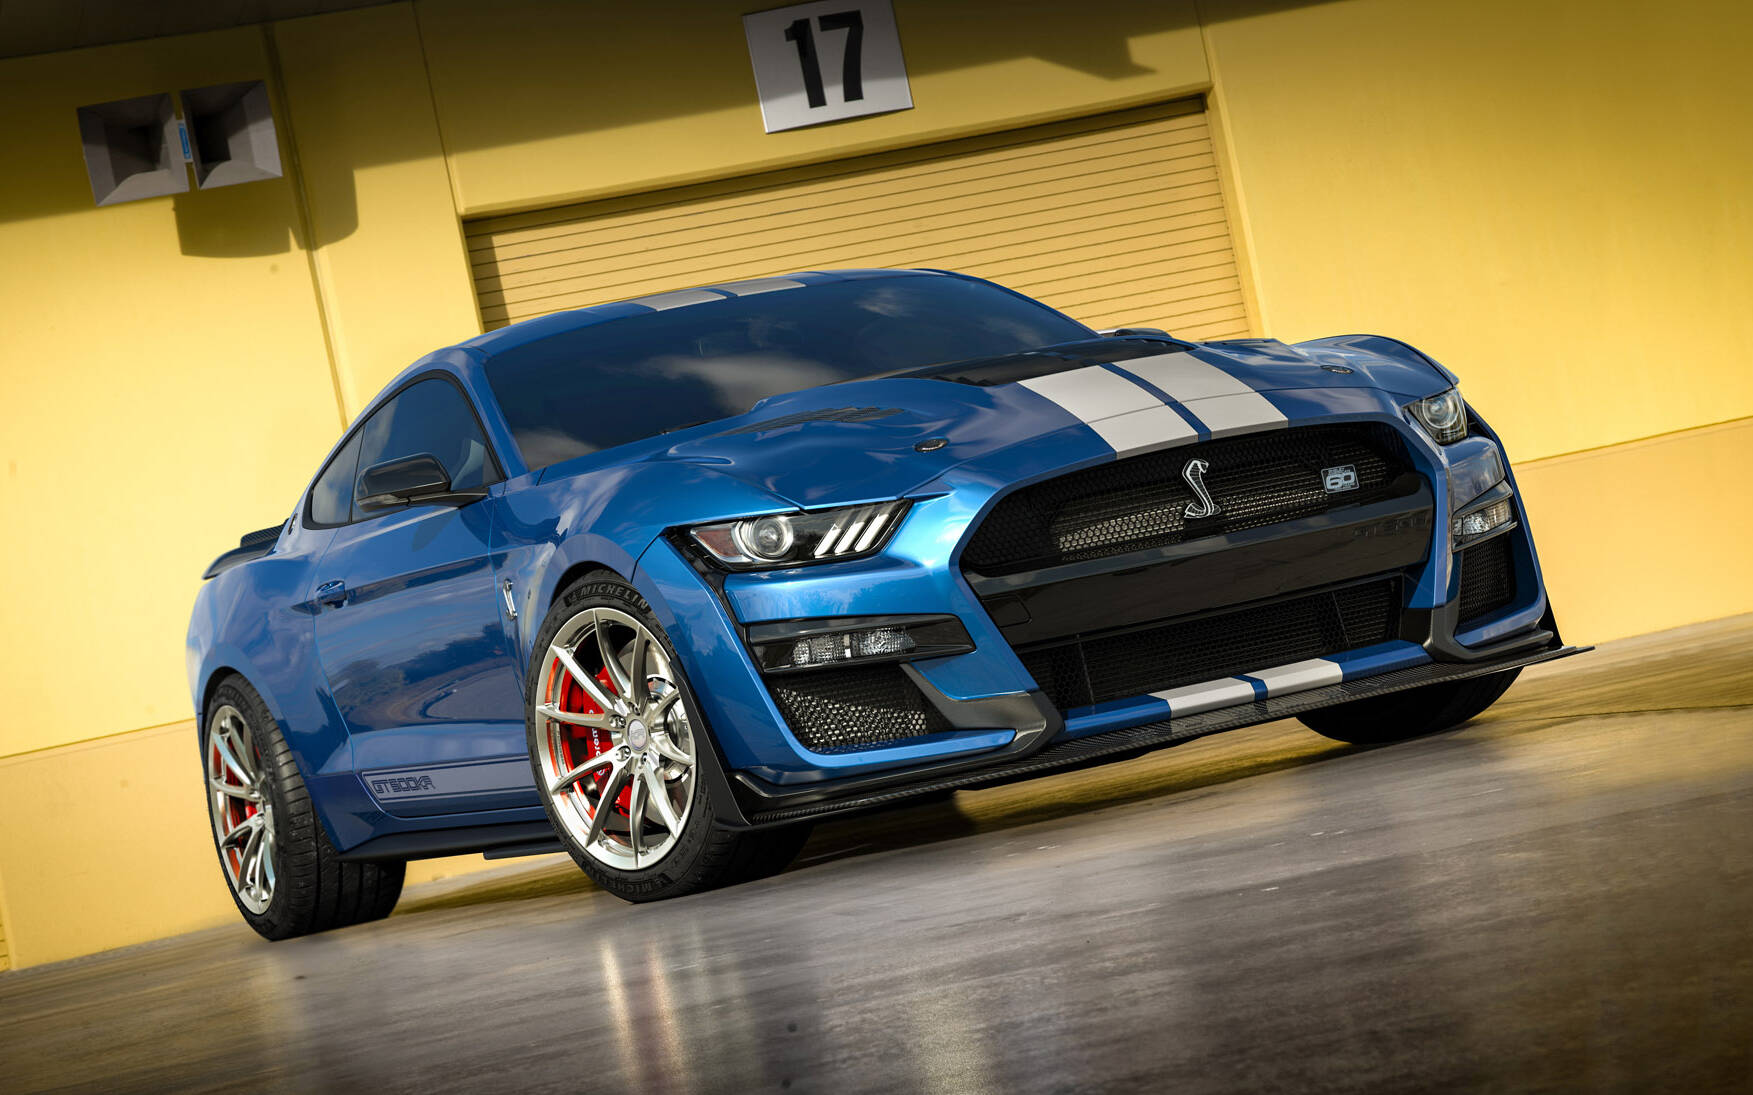 Ford Mustang Shelby GT500KR is Back With Over 900 Horsepower - The Car Guide